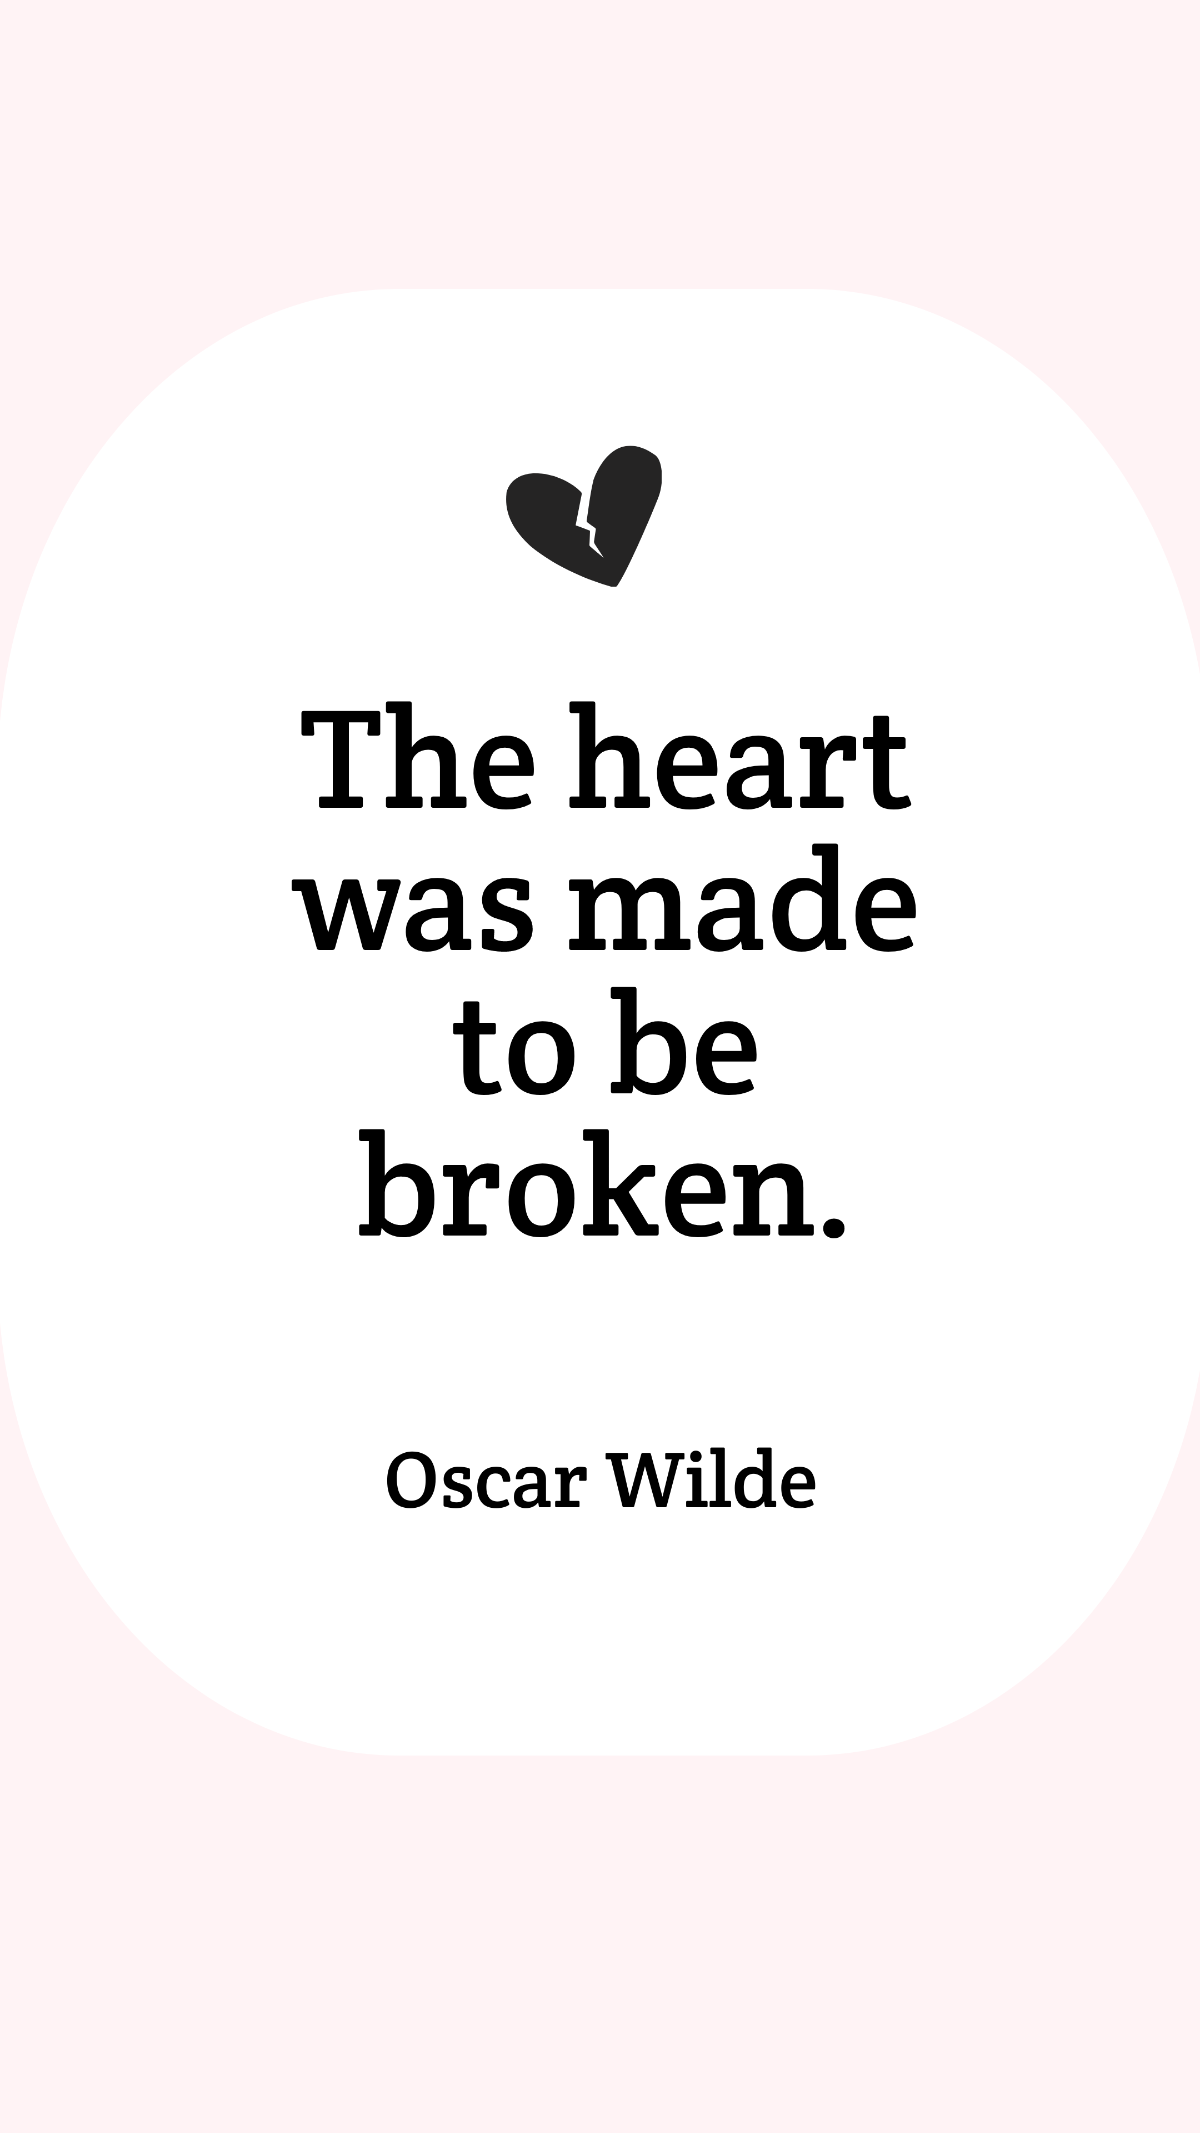 Free Oscar Wilde - The heart was made to be broken. Template